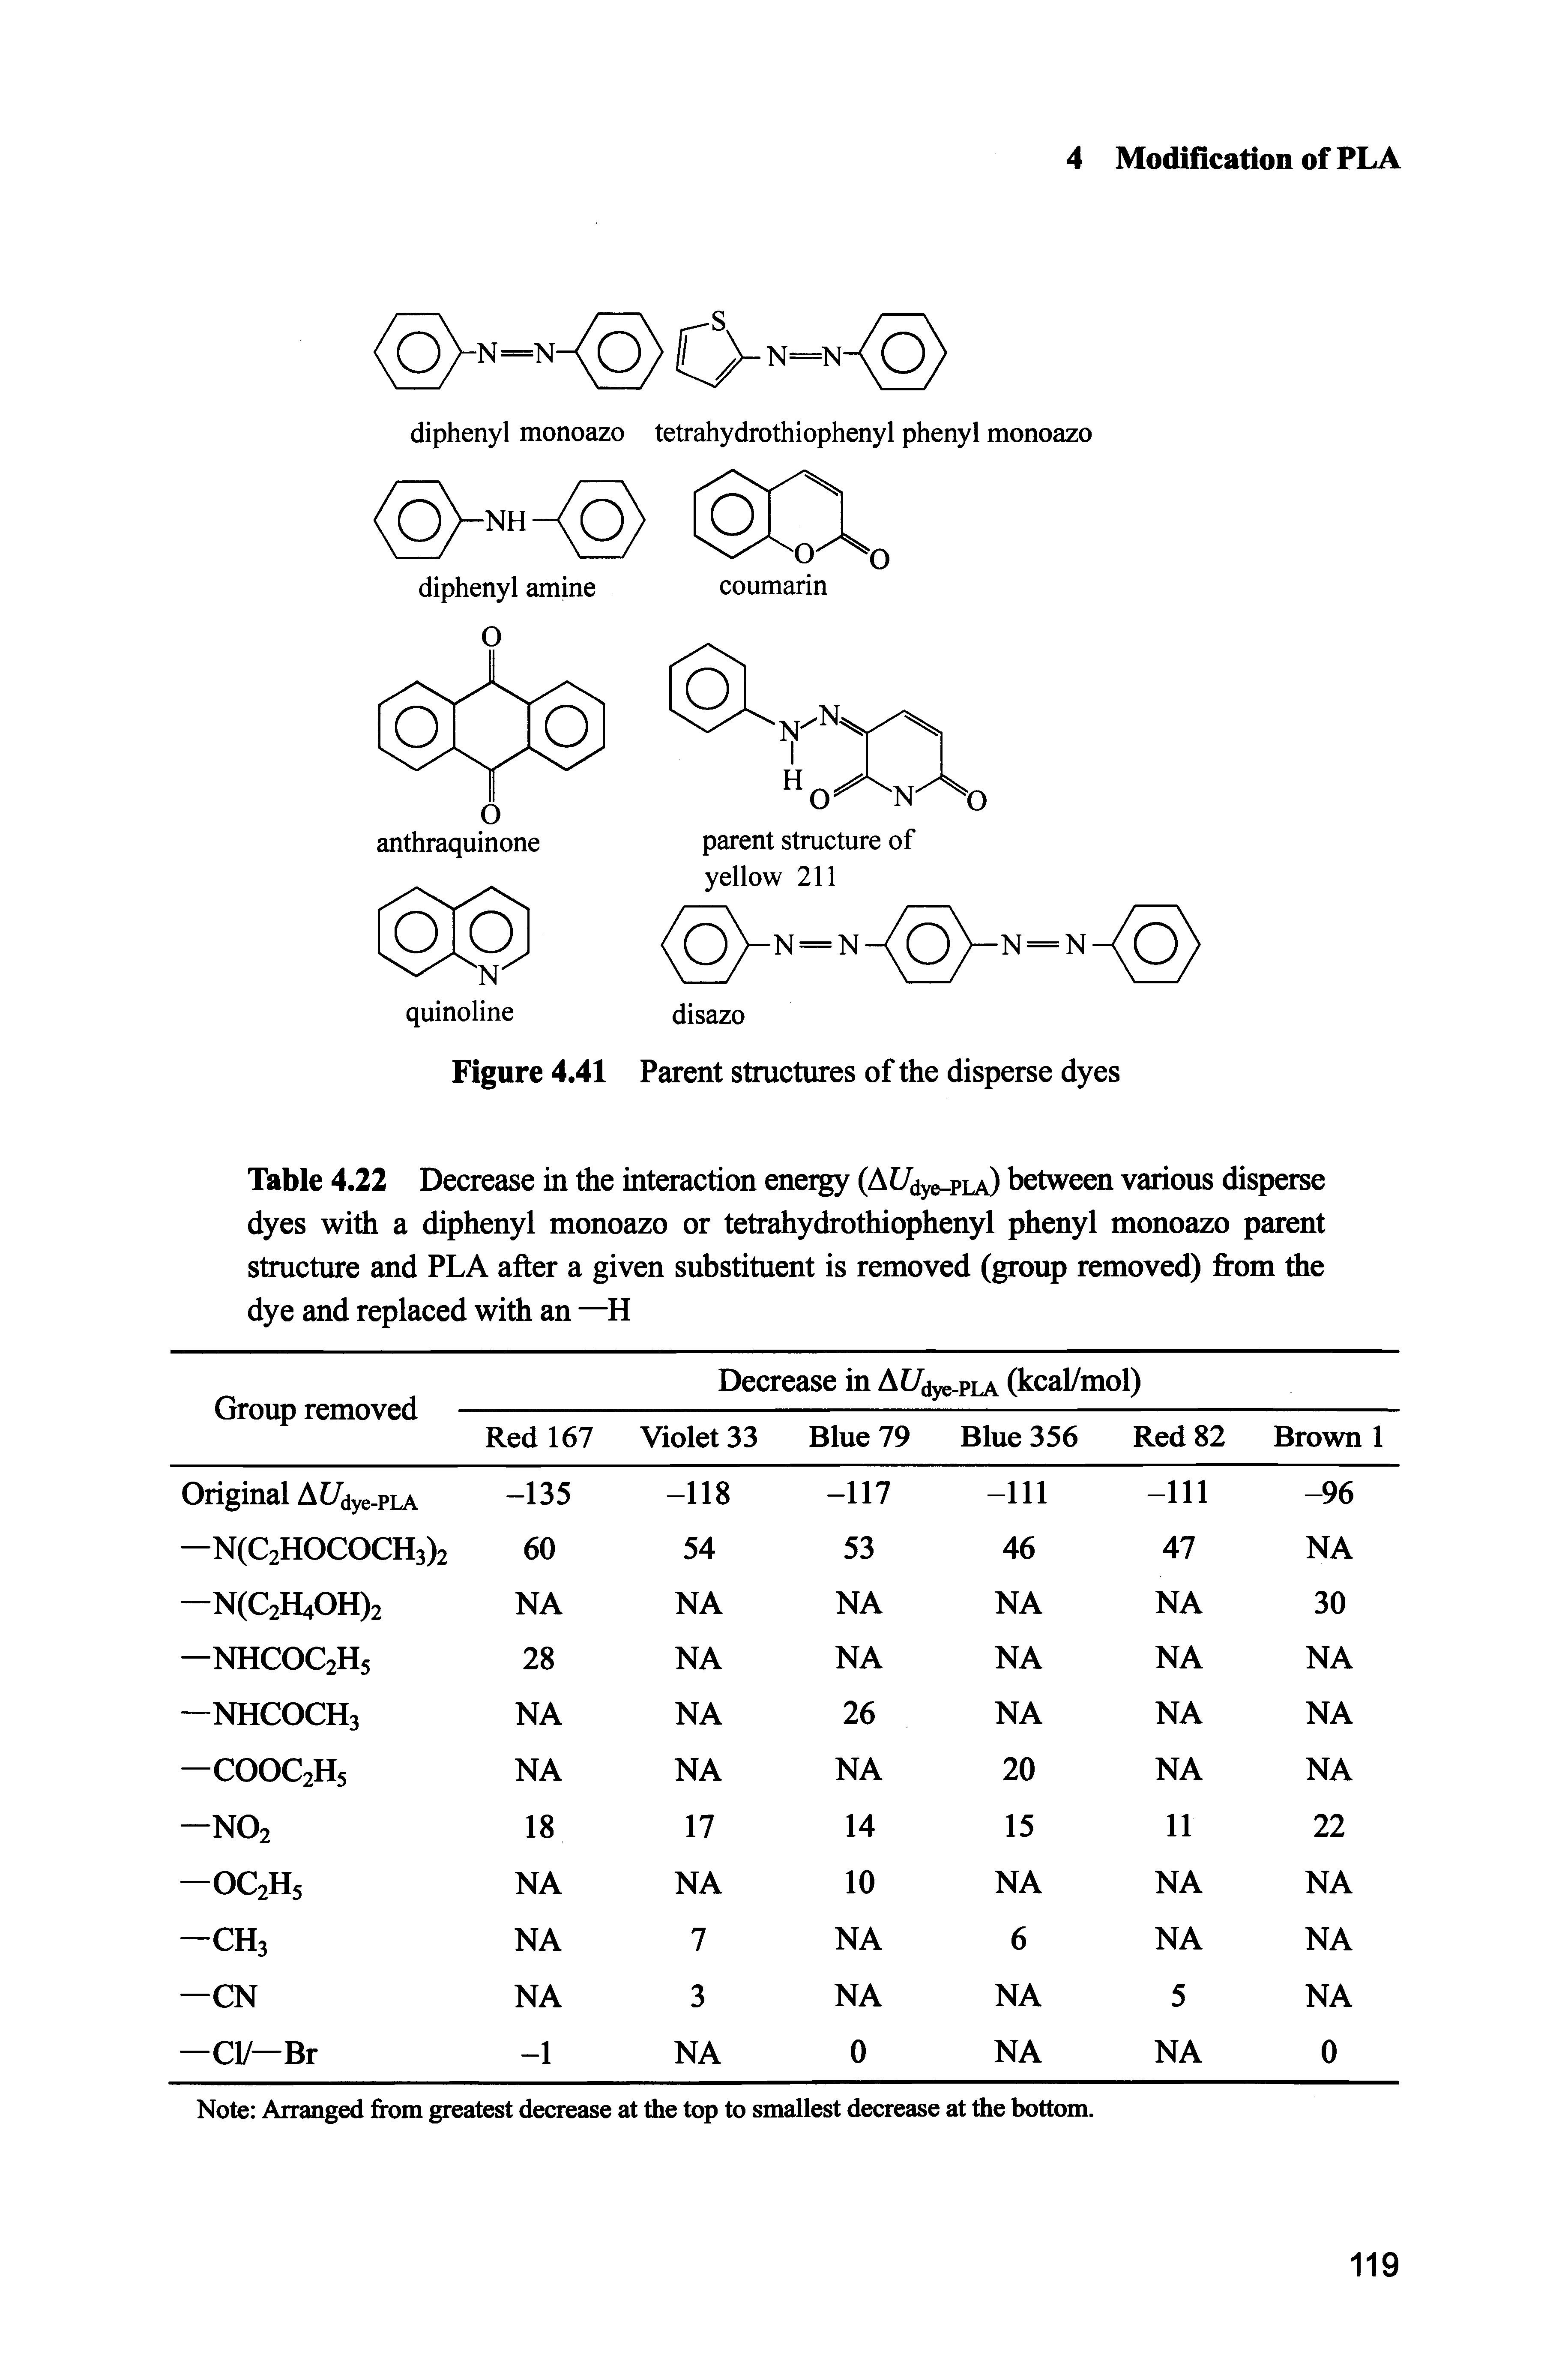 Table 4.22 Decrease in the interaction energy (AC/dy -PLA) between various disperse dyes with a diphenyl monoazo or tetrahydrothiophenyl phenyl monoazo parent structure and PLA after a given substituent is removed (group removed) fi-om the dye and replaced with an —...